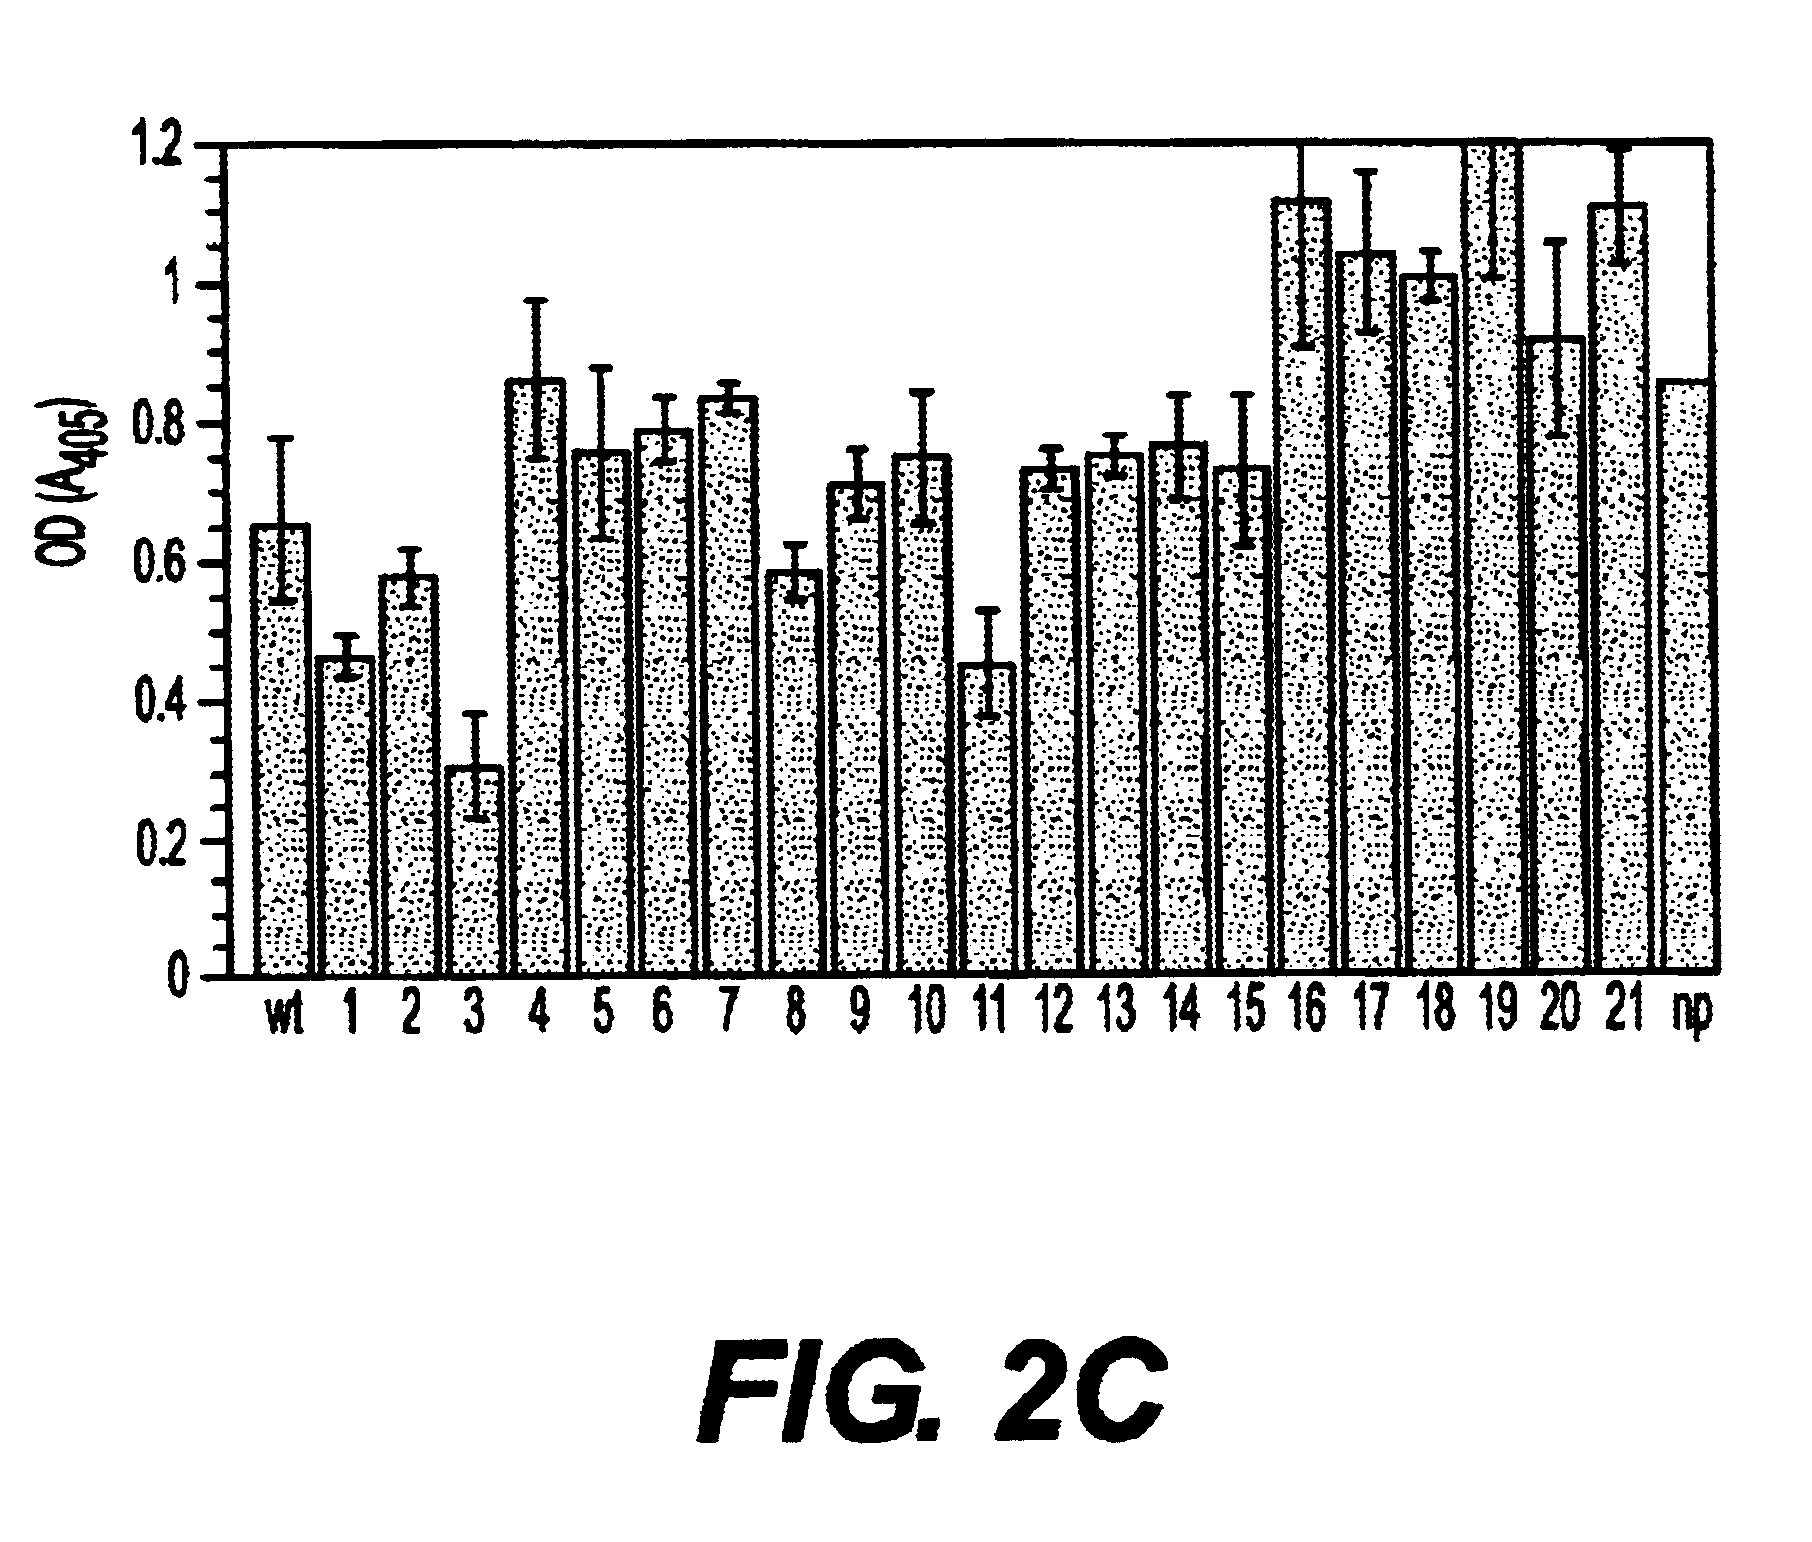 Fibronectin binding protein compositions and methods of use